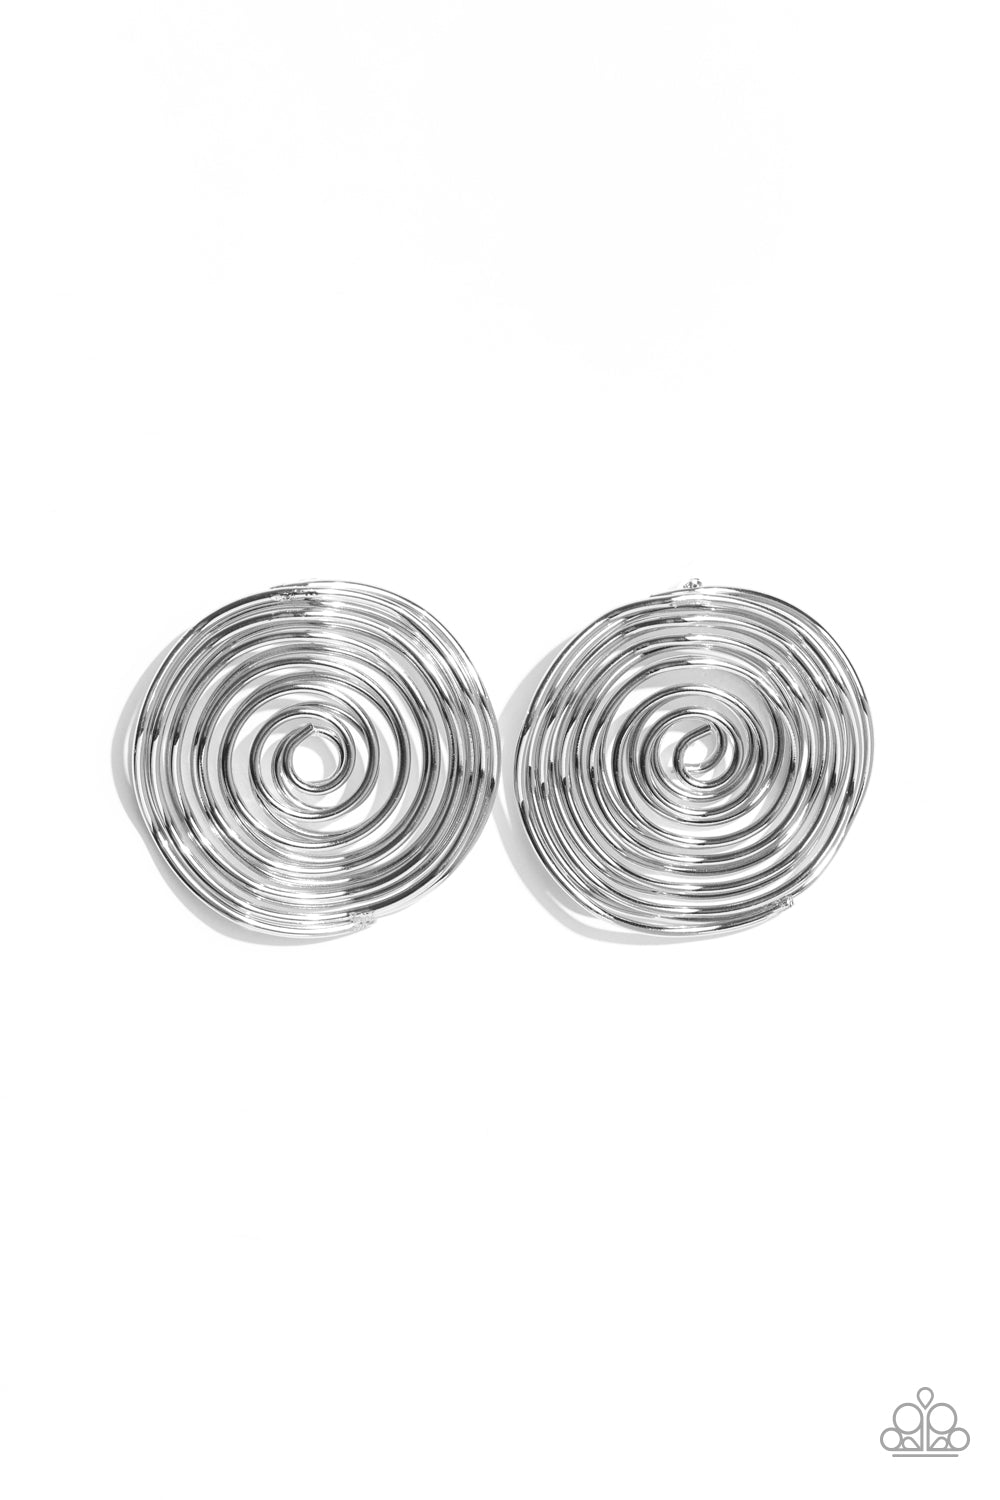 COIL Over - Silver (Post) Earring